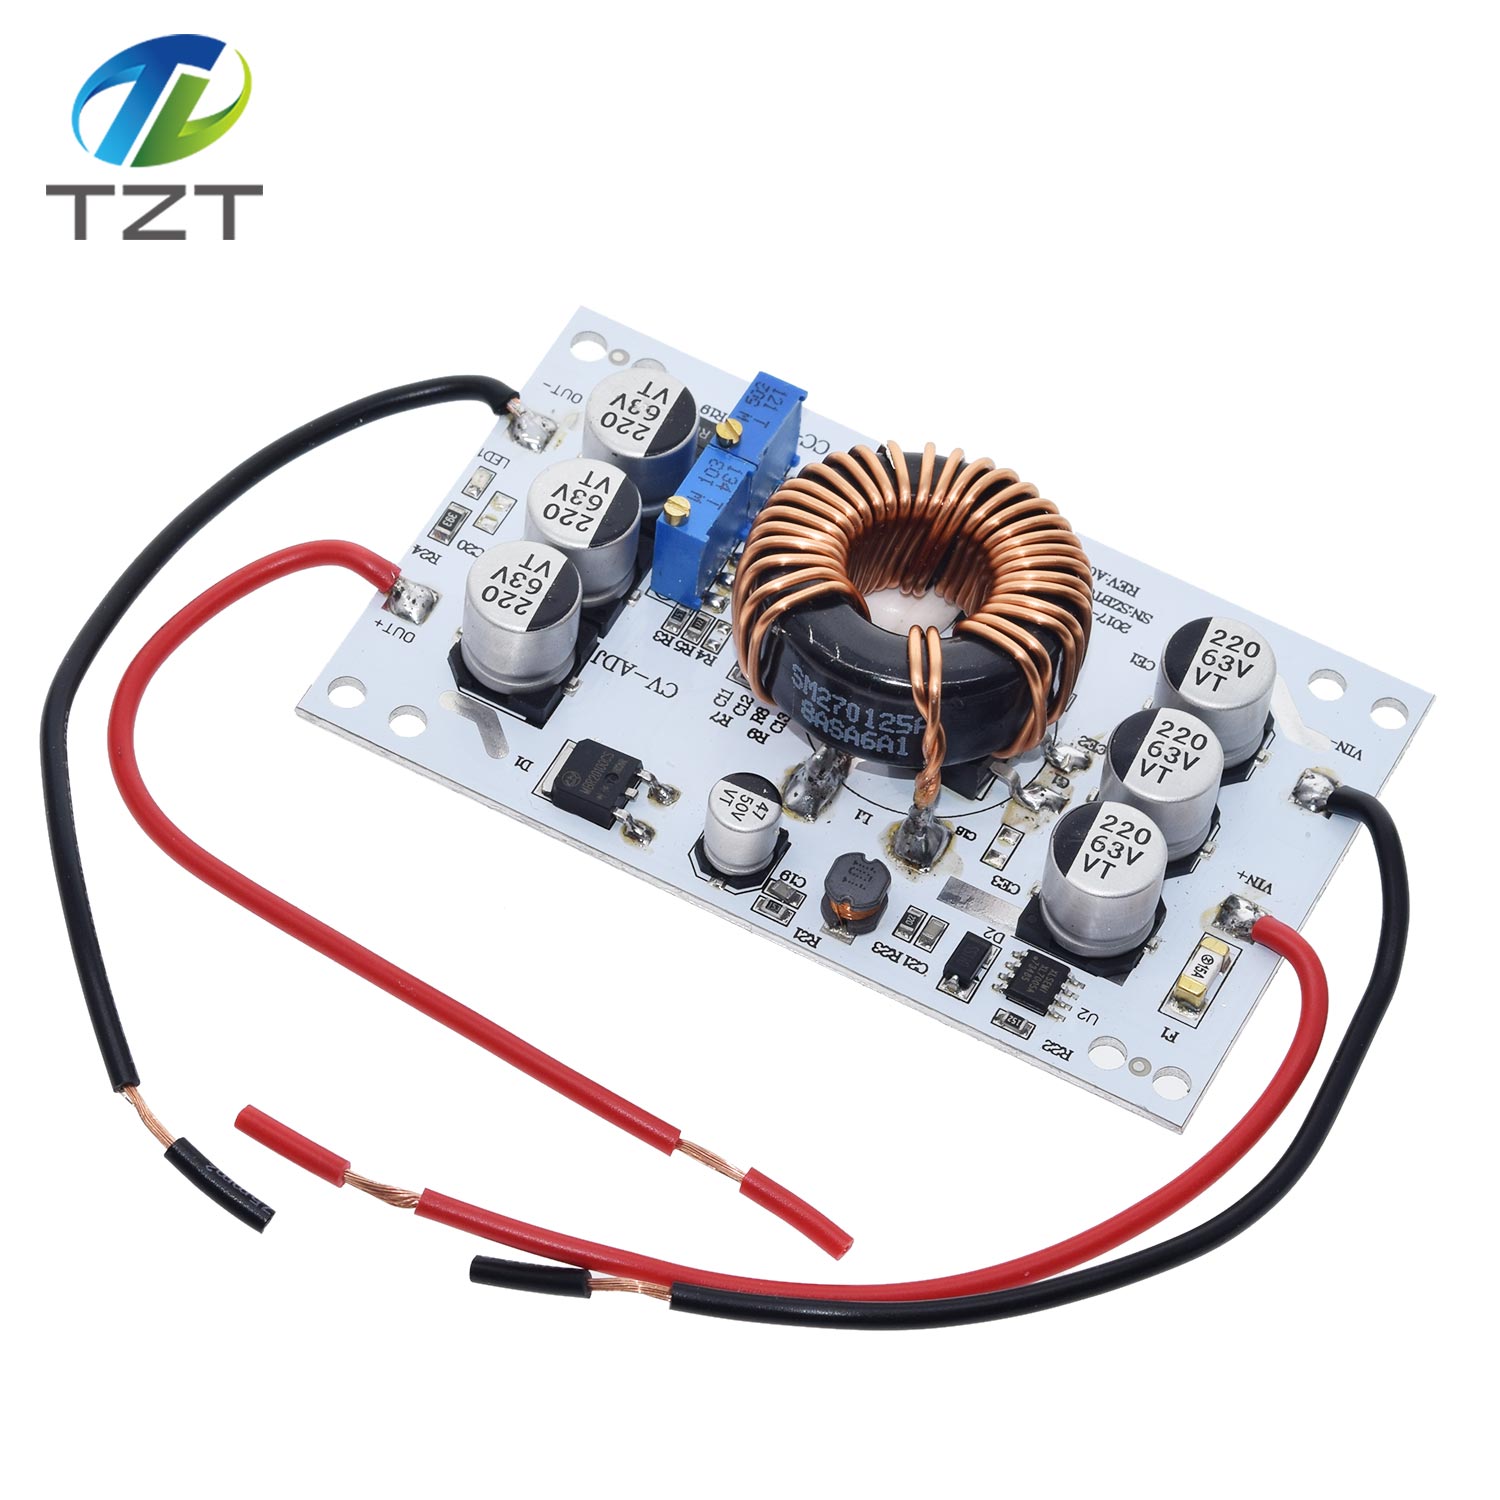 TZT 600W Aluminum Plate DC-DC Boost Converter Adjustable 10A Step Up Constant Current Power Supply Module Led Driver For Arduino